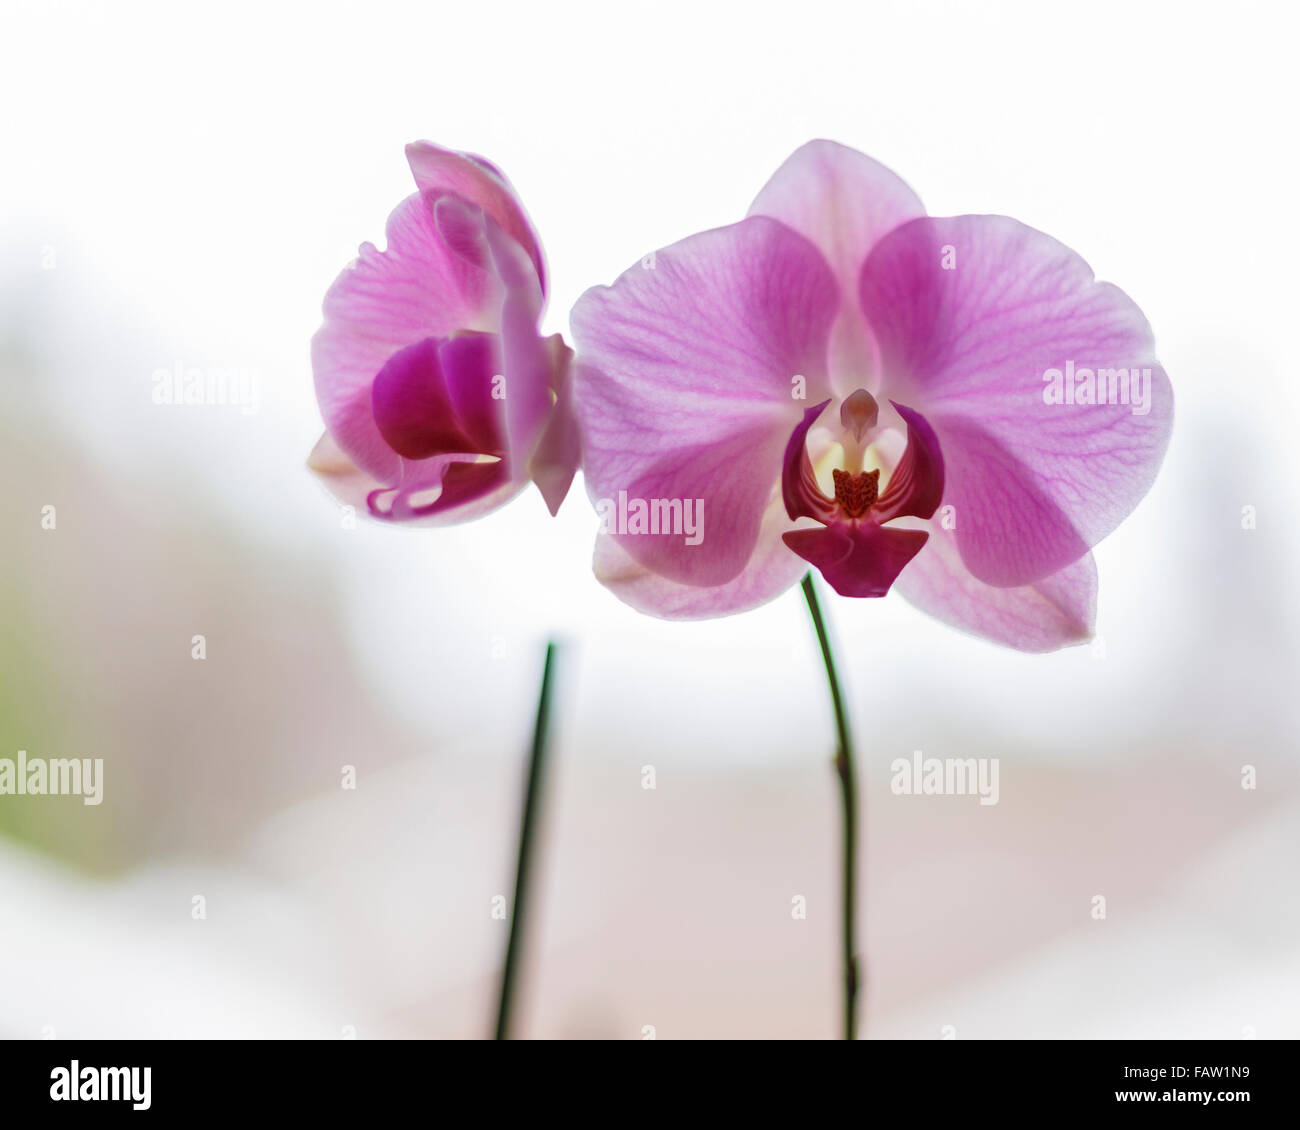 Purple or pink Phalaenopsis, known as the Moth Orchid, abbreviated Phal in the horticultural trade, is an orchid genus of approximately 60 species.  Model Release: No.  Property Release: No. Stock Photo